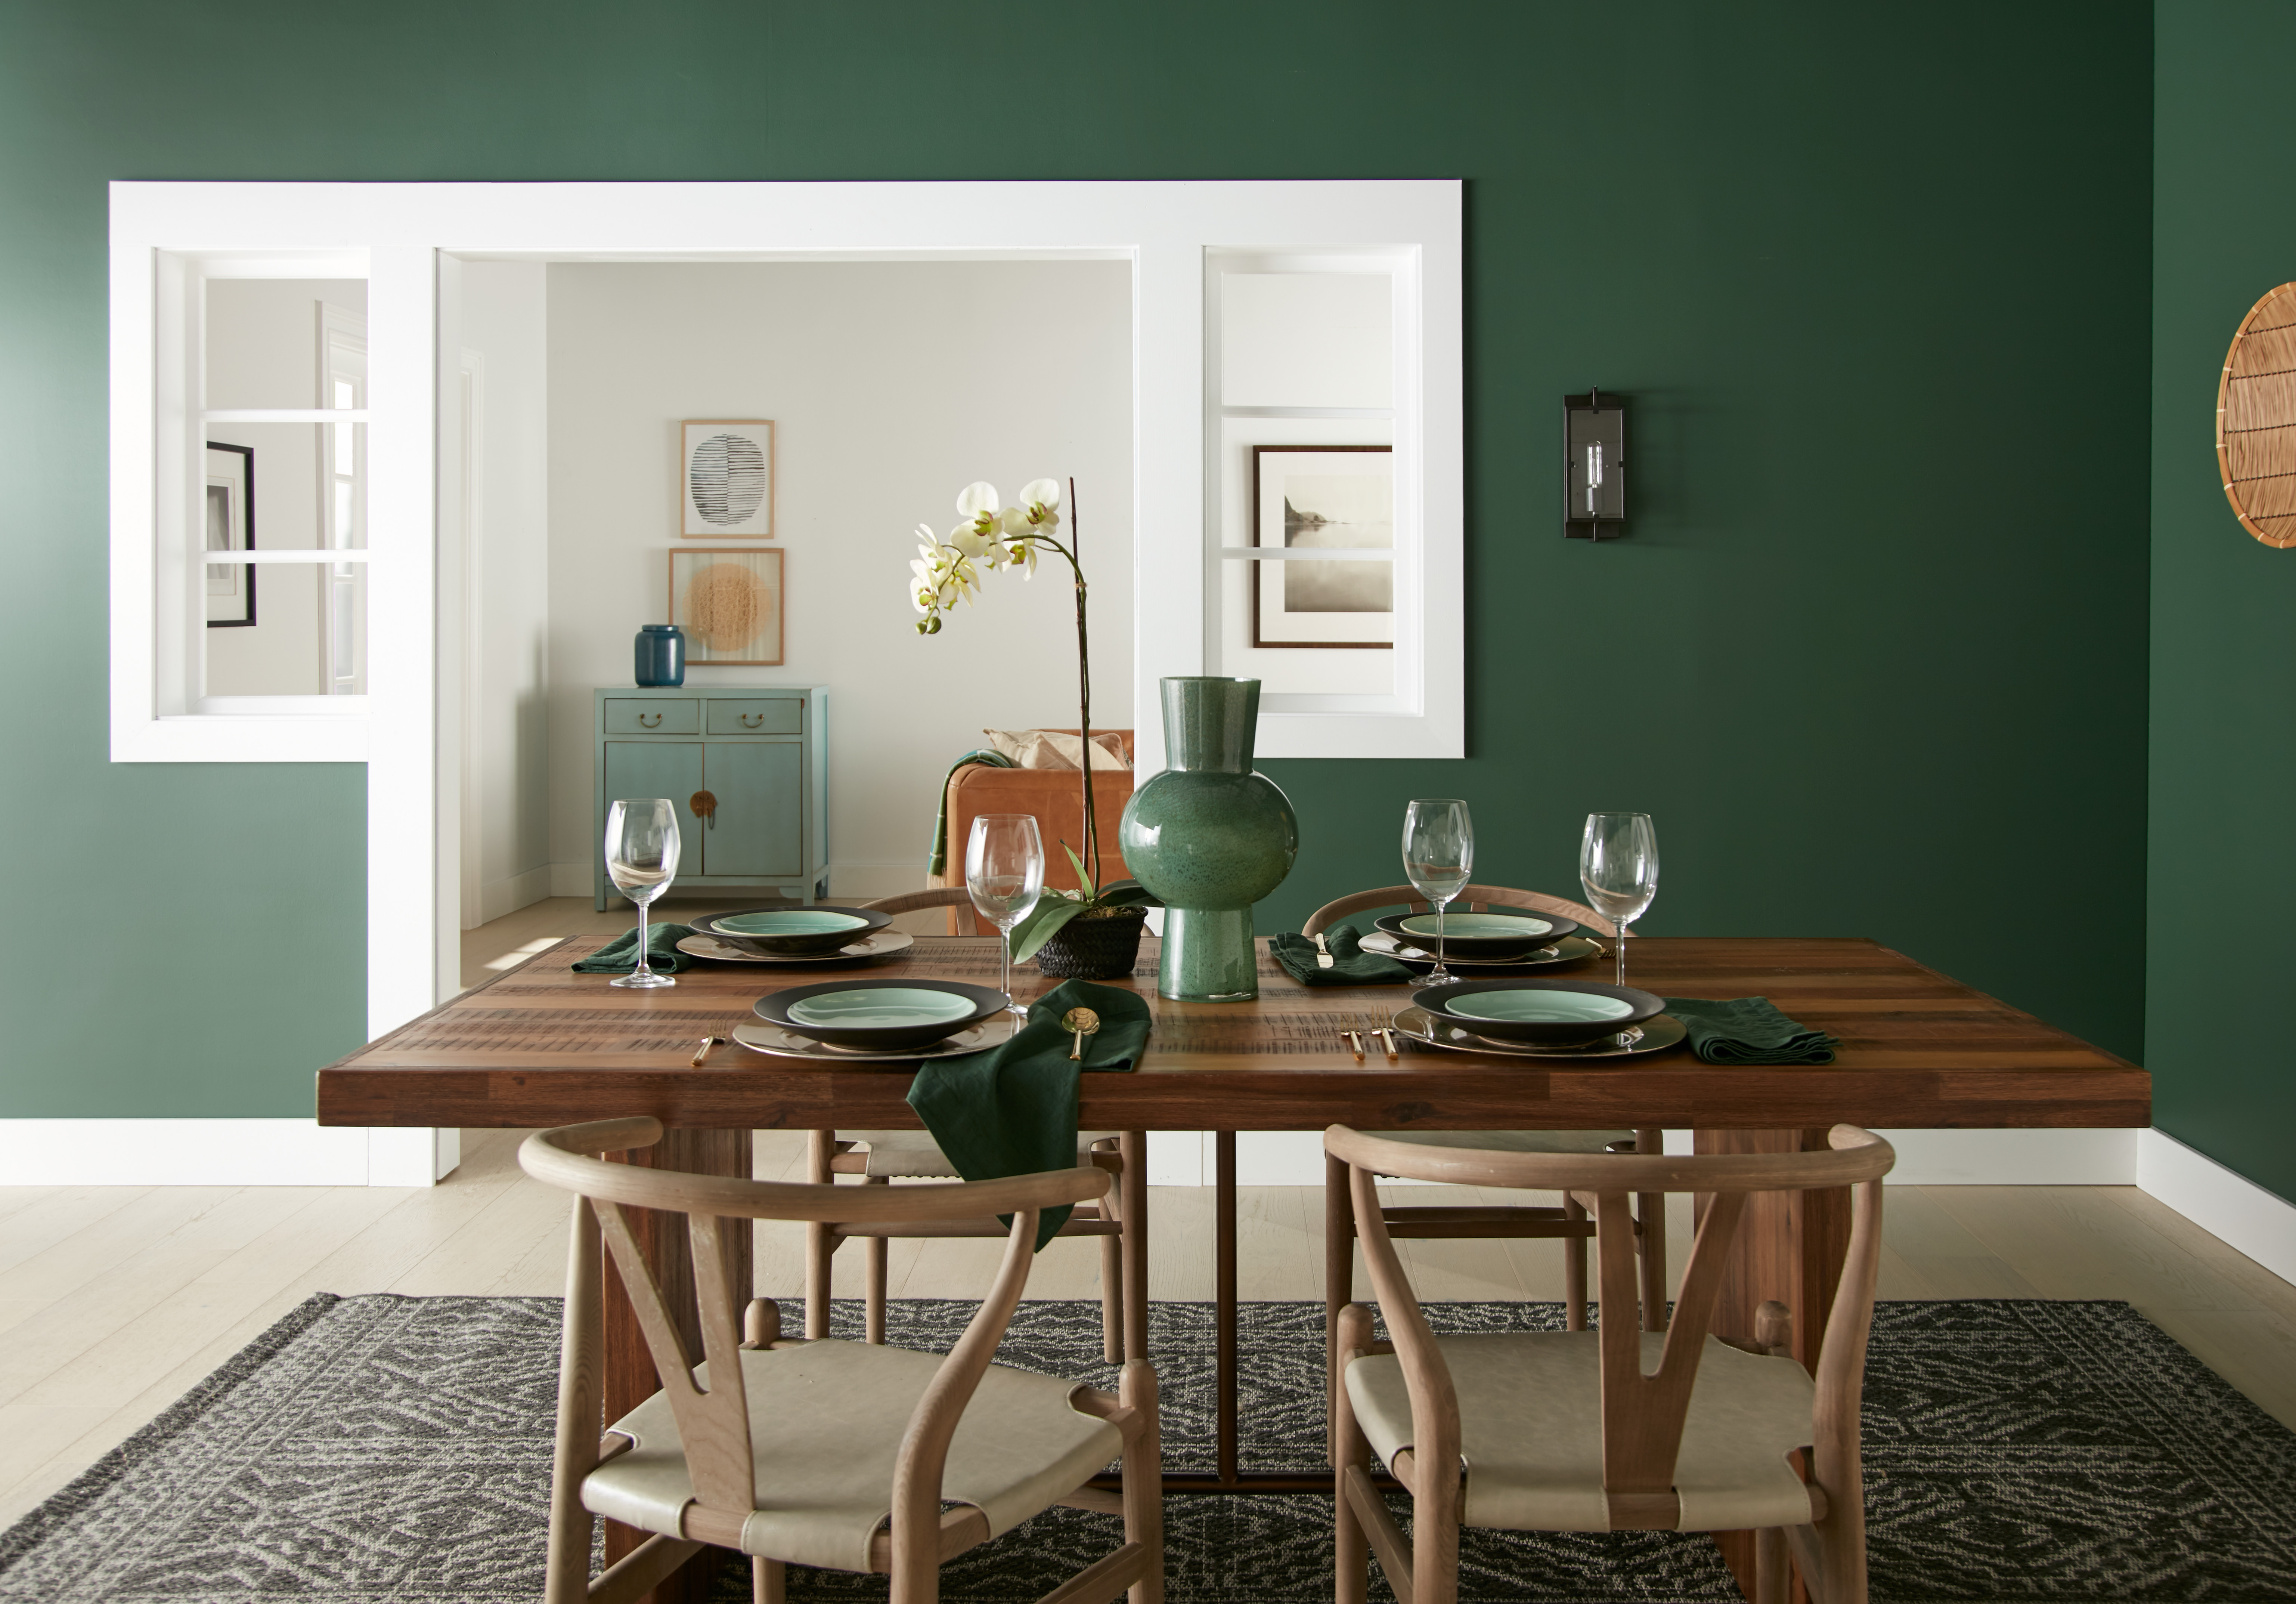 A dining room with walls painted in a deep green colour and a mix of light and dark wood dining table and chairs in the middle.